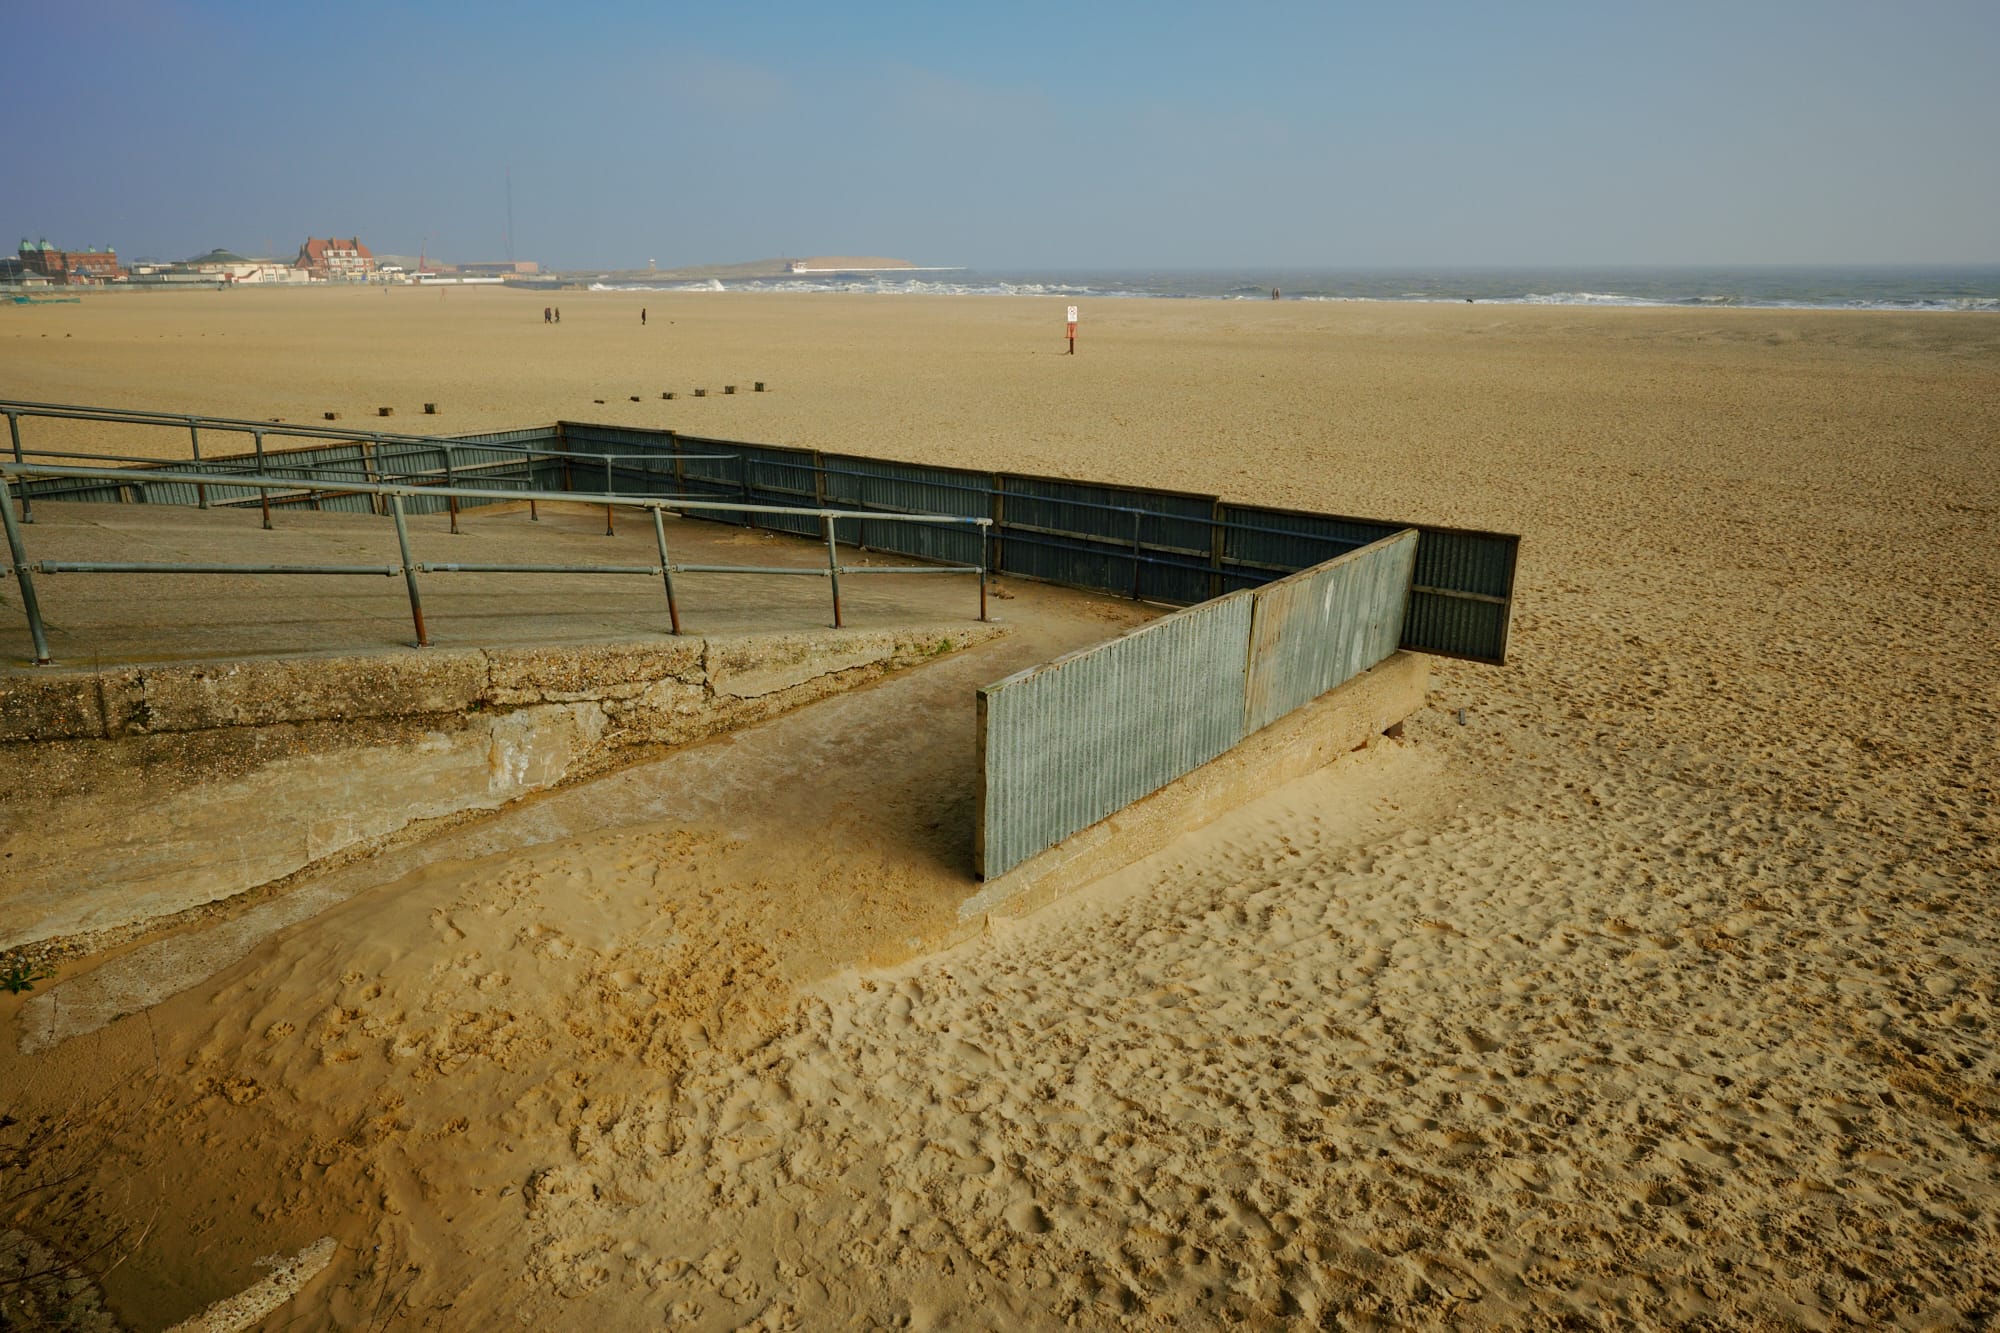 corrugated metal sheeting attached to railings on the beach